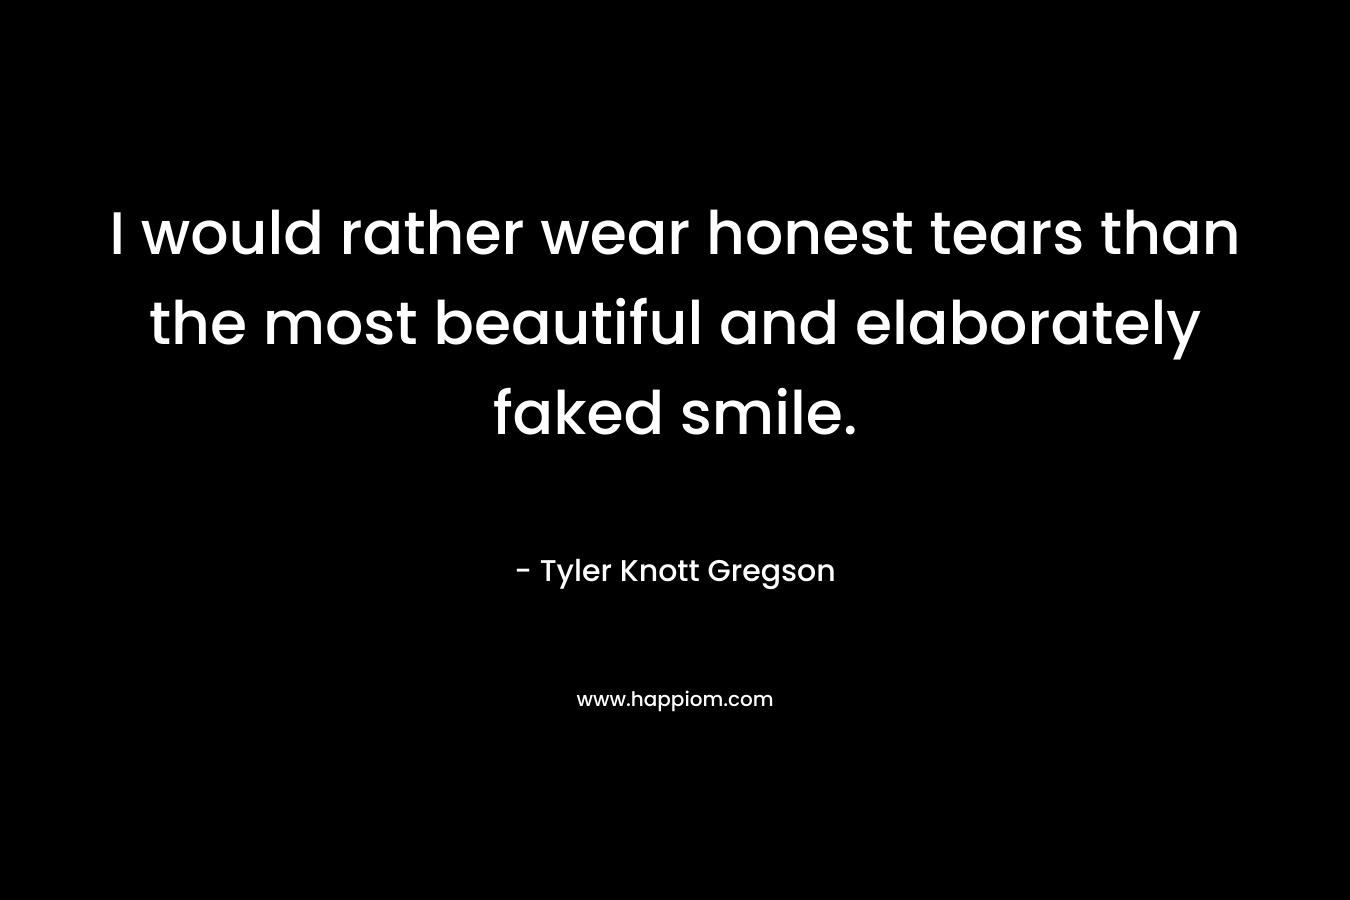 I would rather wear honest tears than the most beautiful and elaborately faked smile. – Tyler Knott Gregson